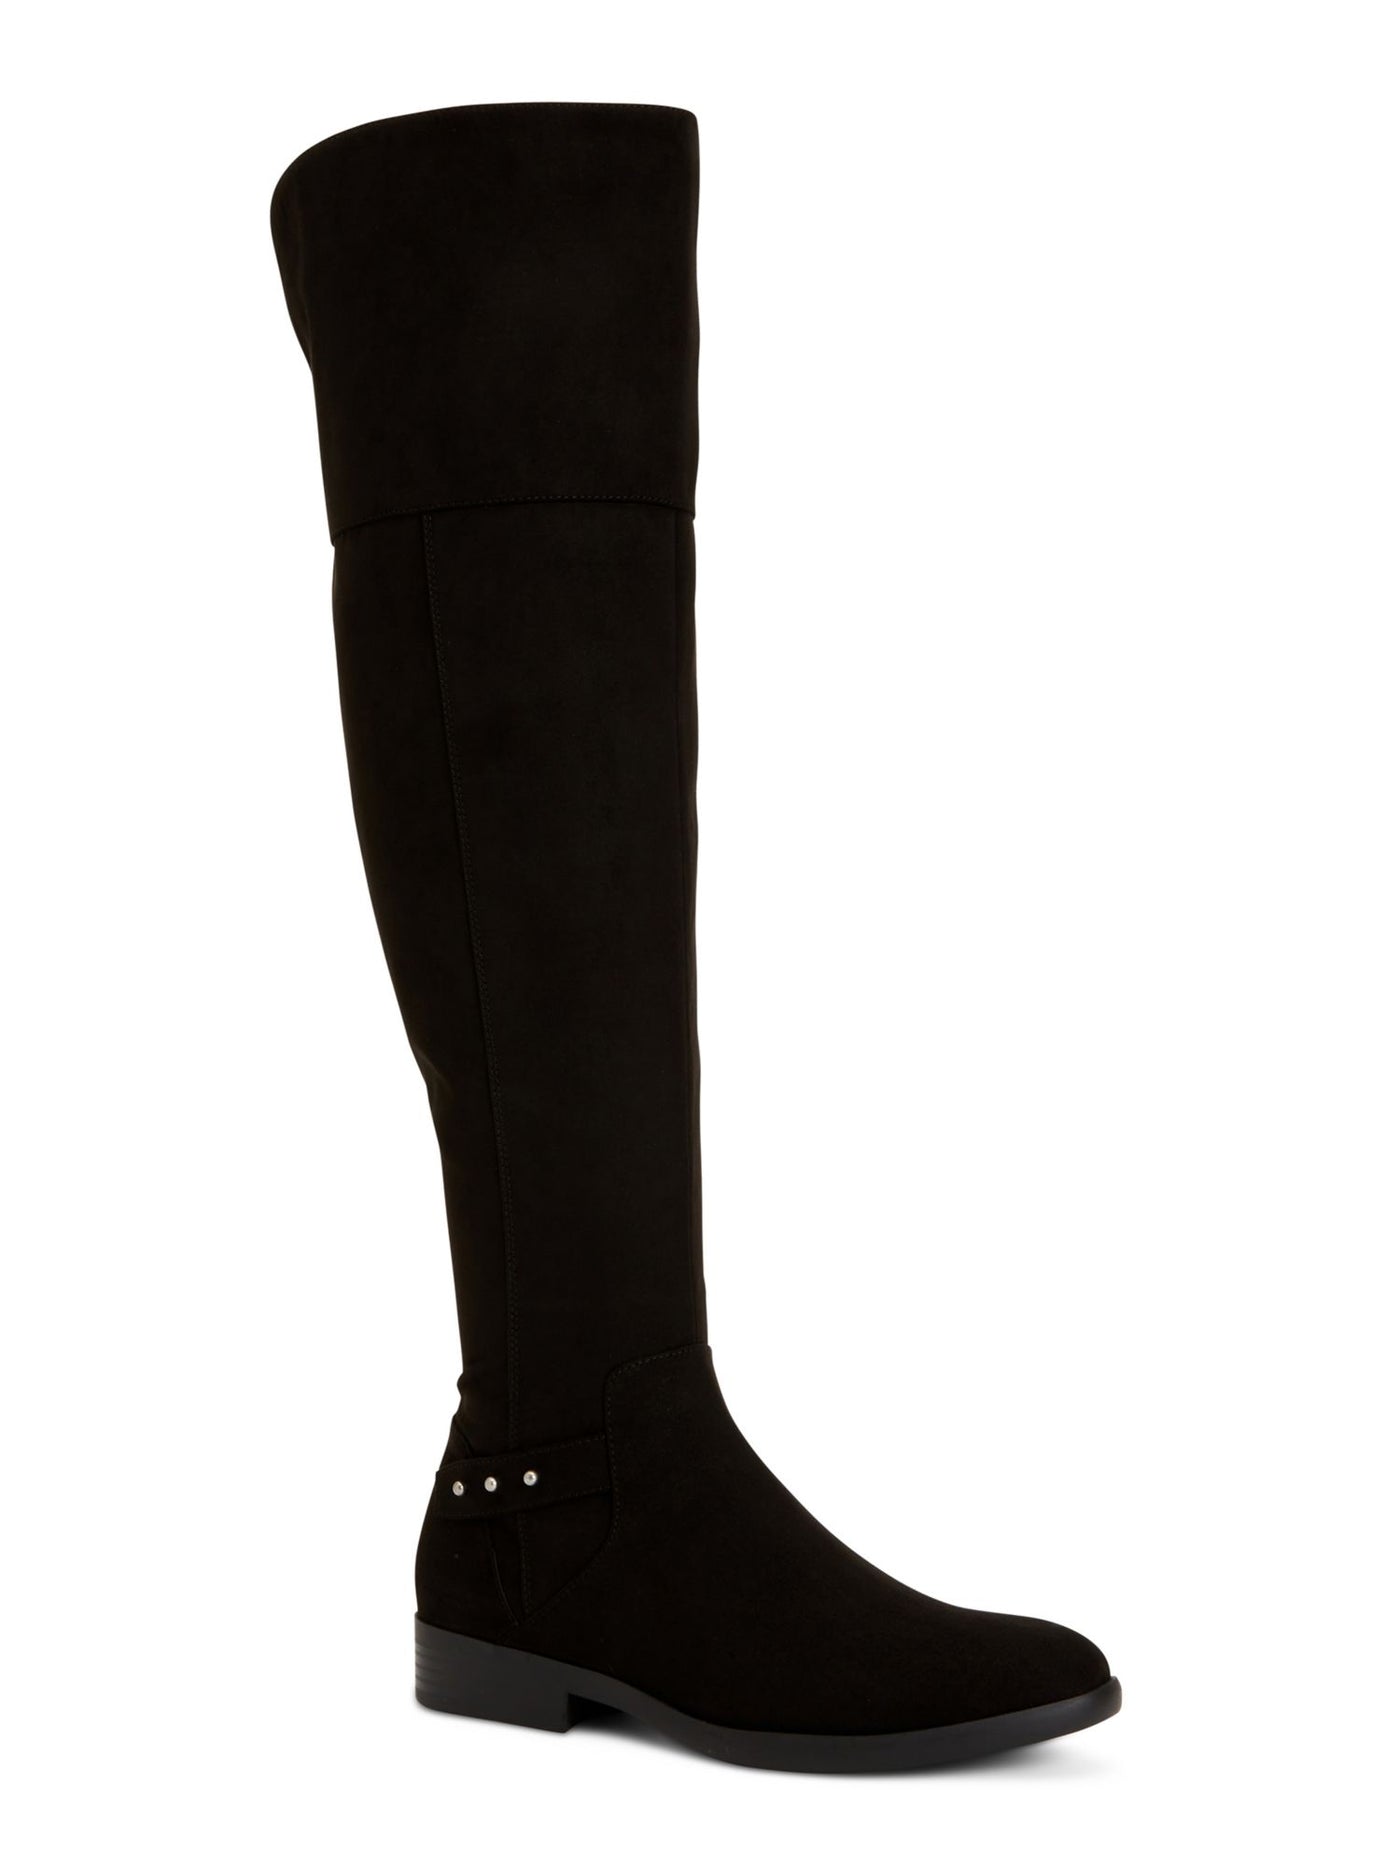 STYLE & COMPANY Womens Black Overthe Knee Boots Memory Foam Studded Slip Resistant Round Toe Block Heel Boots 8 M